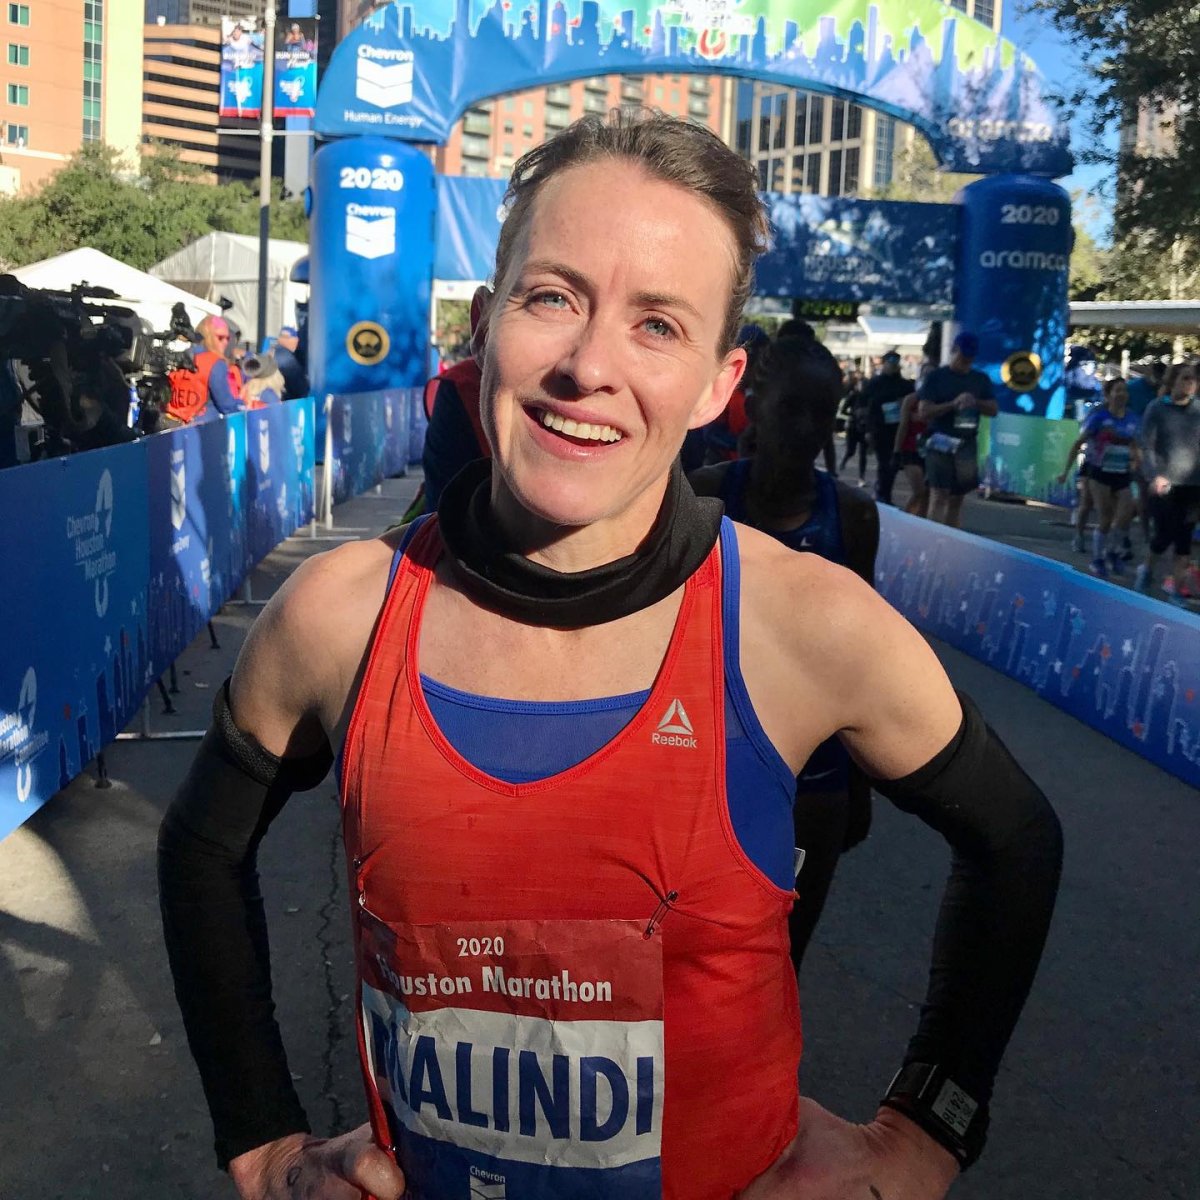 Elmore crushed the Canadian women's marathon record on Sunday, all but booking her spot on the team for the 2020 Tokyo Games.